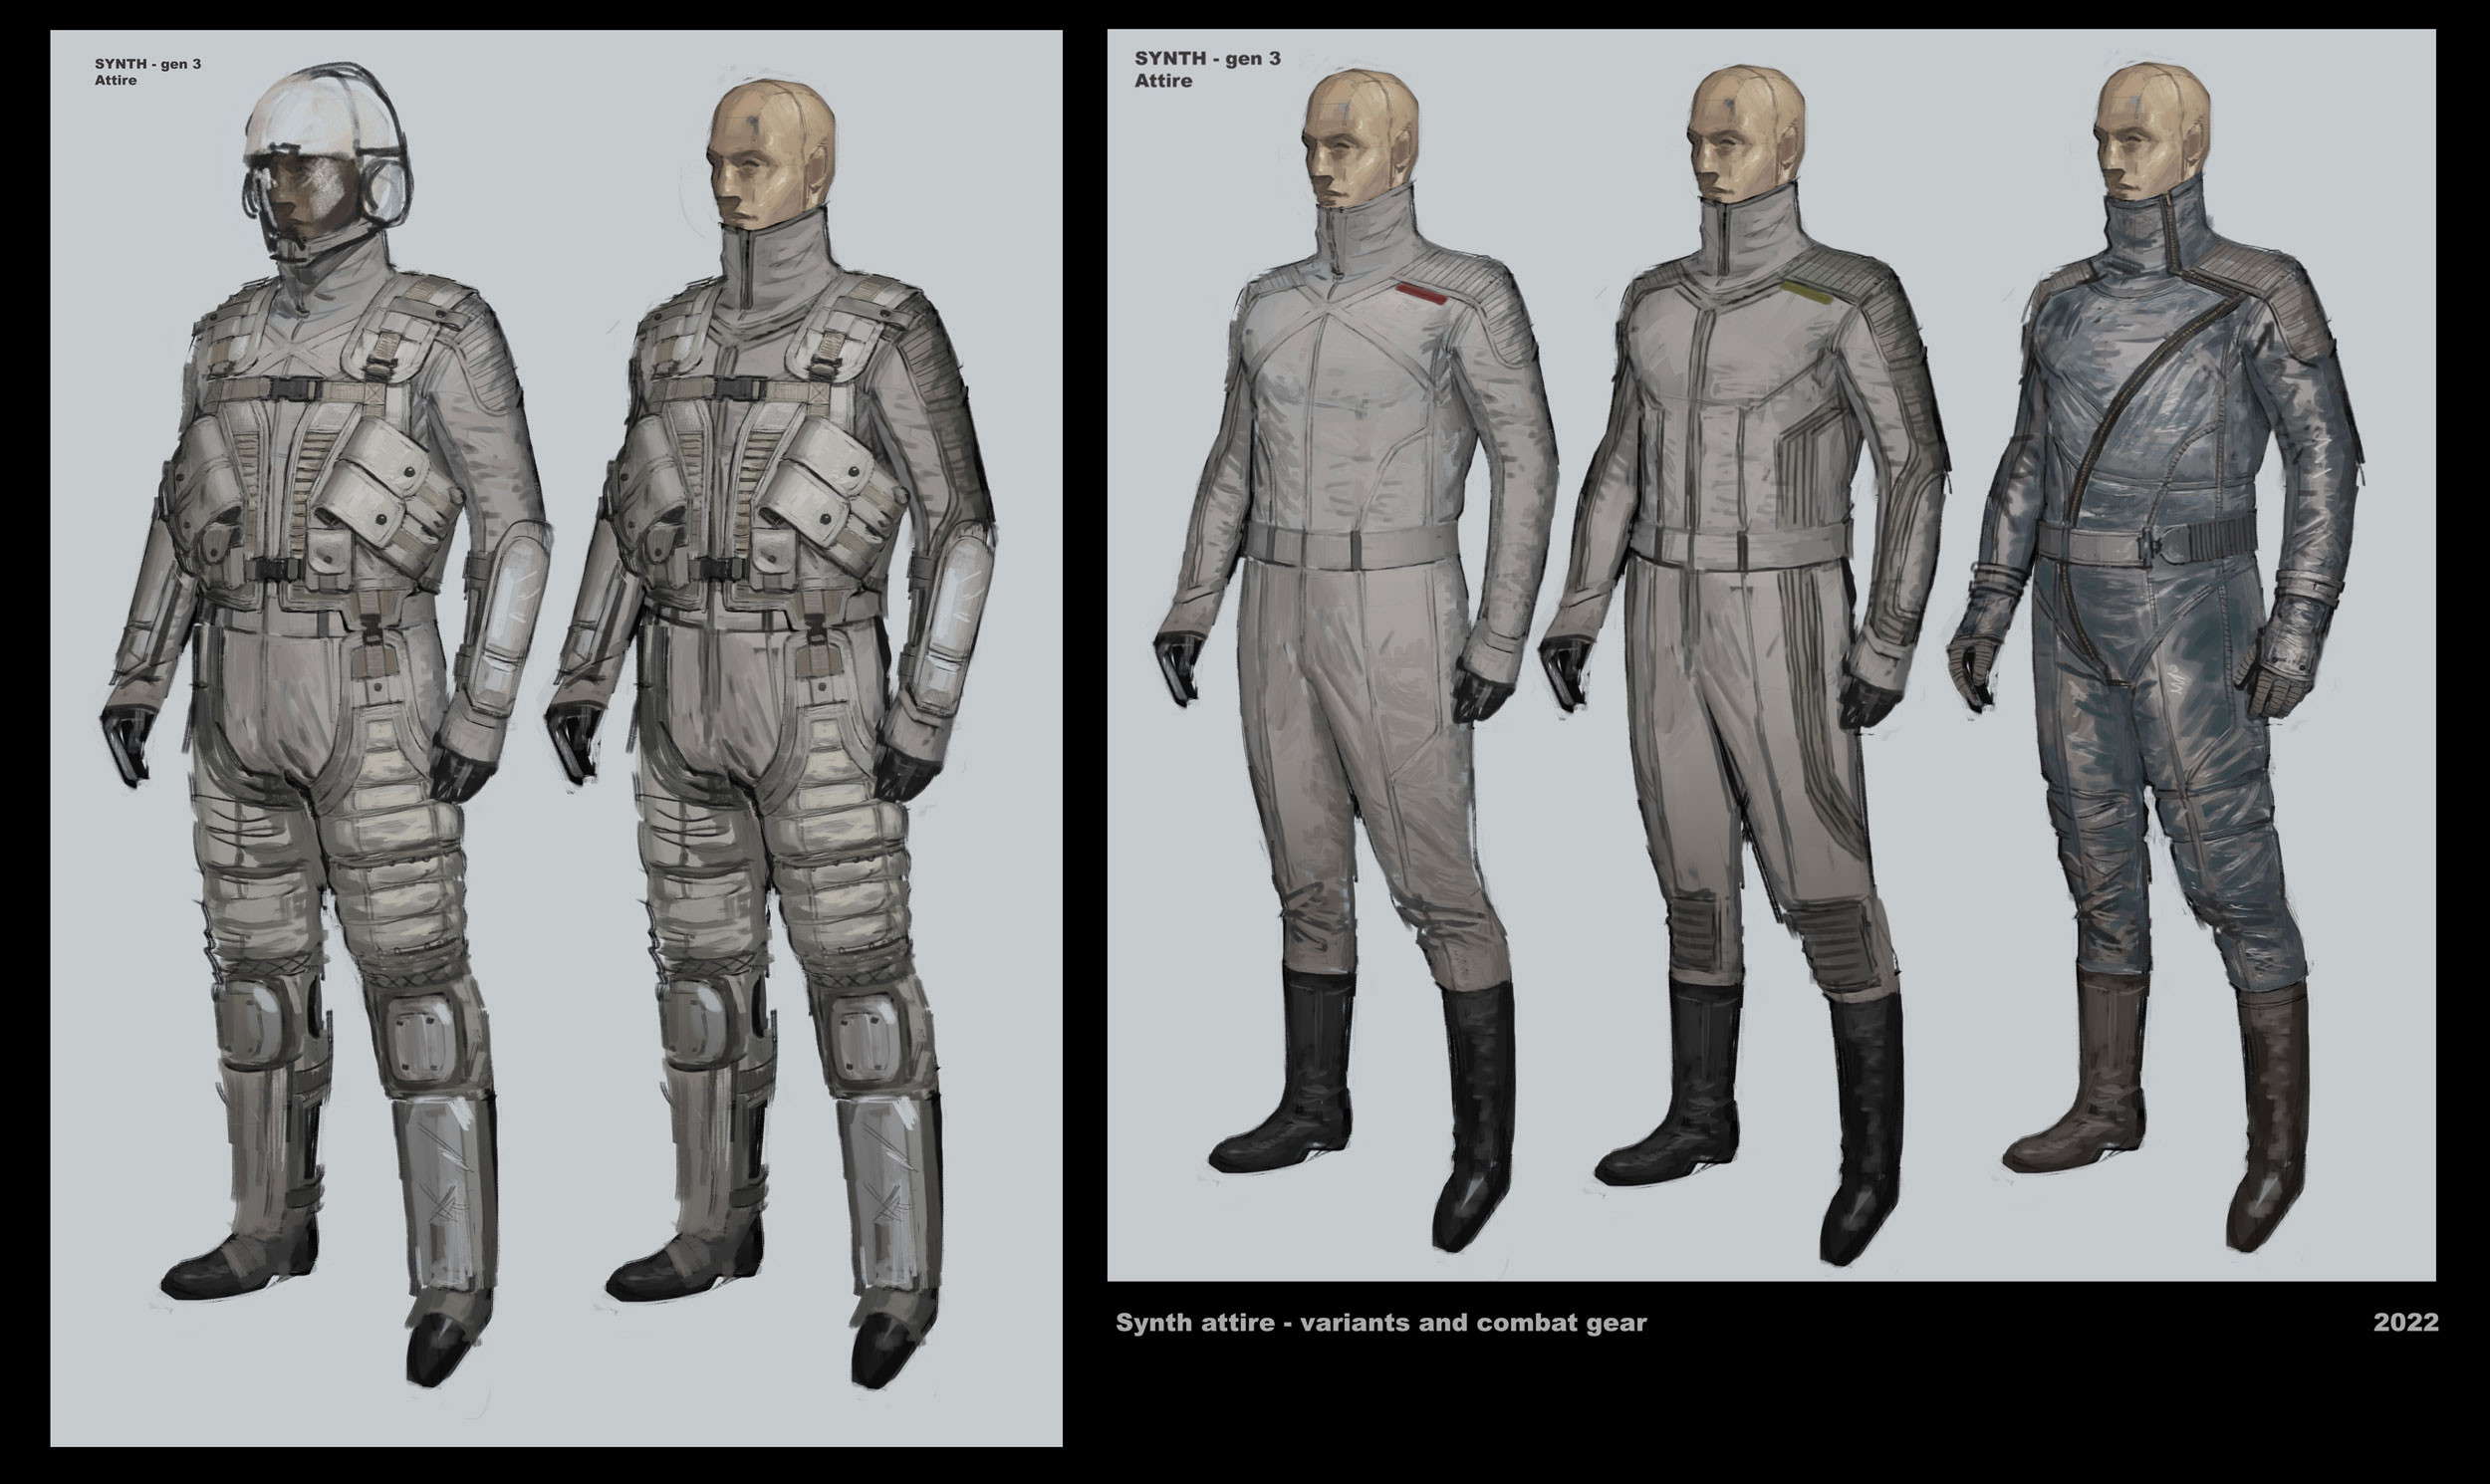 Redesigns of the clothing worn by Synths in Fallout 4. Base variants and combat gear.